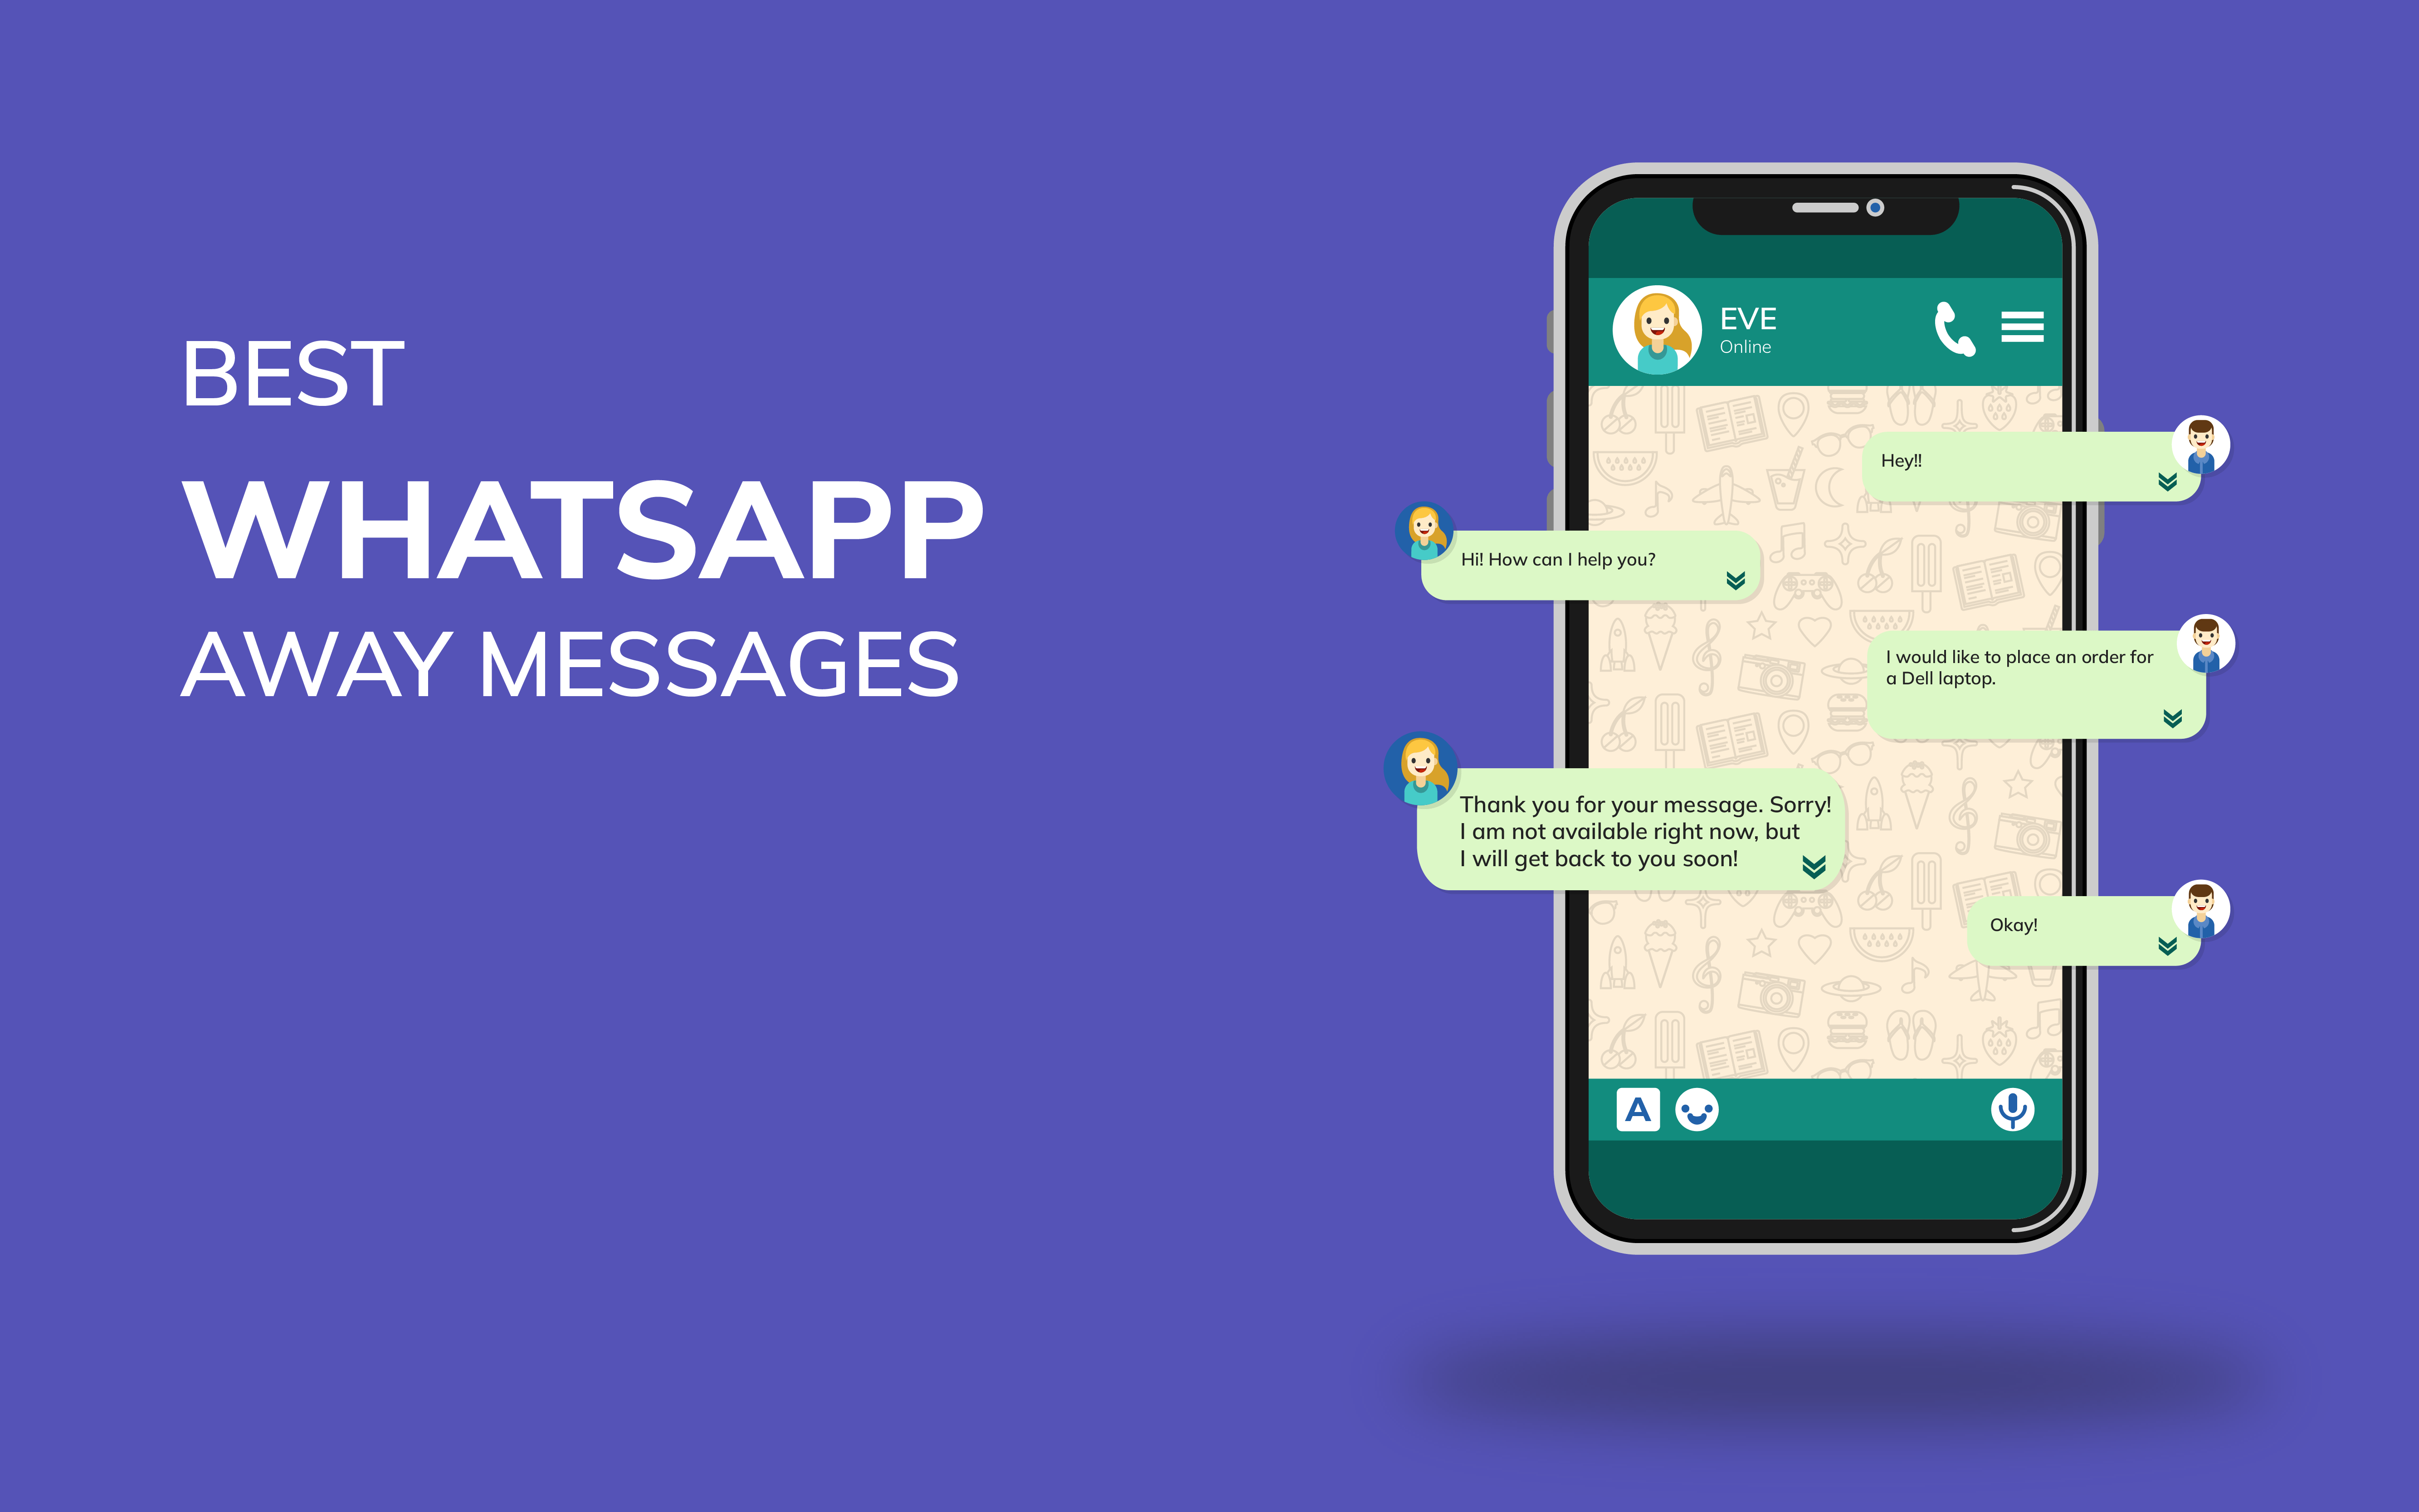 31 Best Whatsapp Away Messages for Business (Templates & Best Practices)